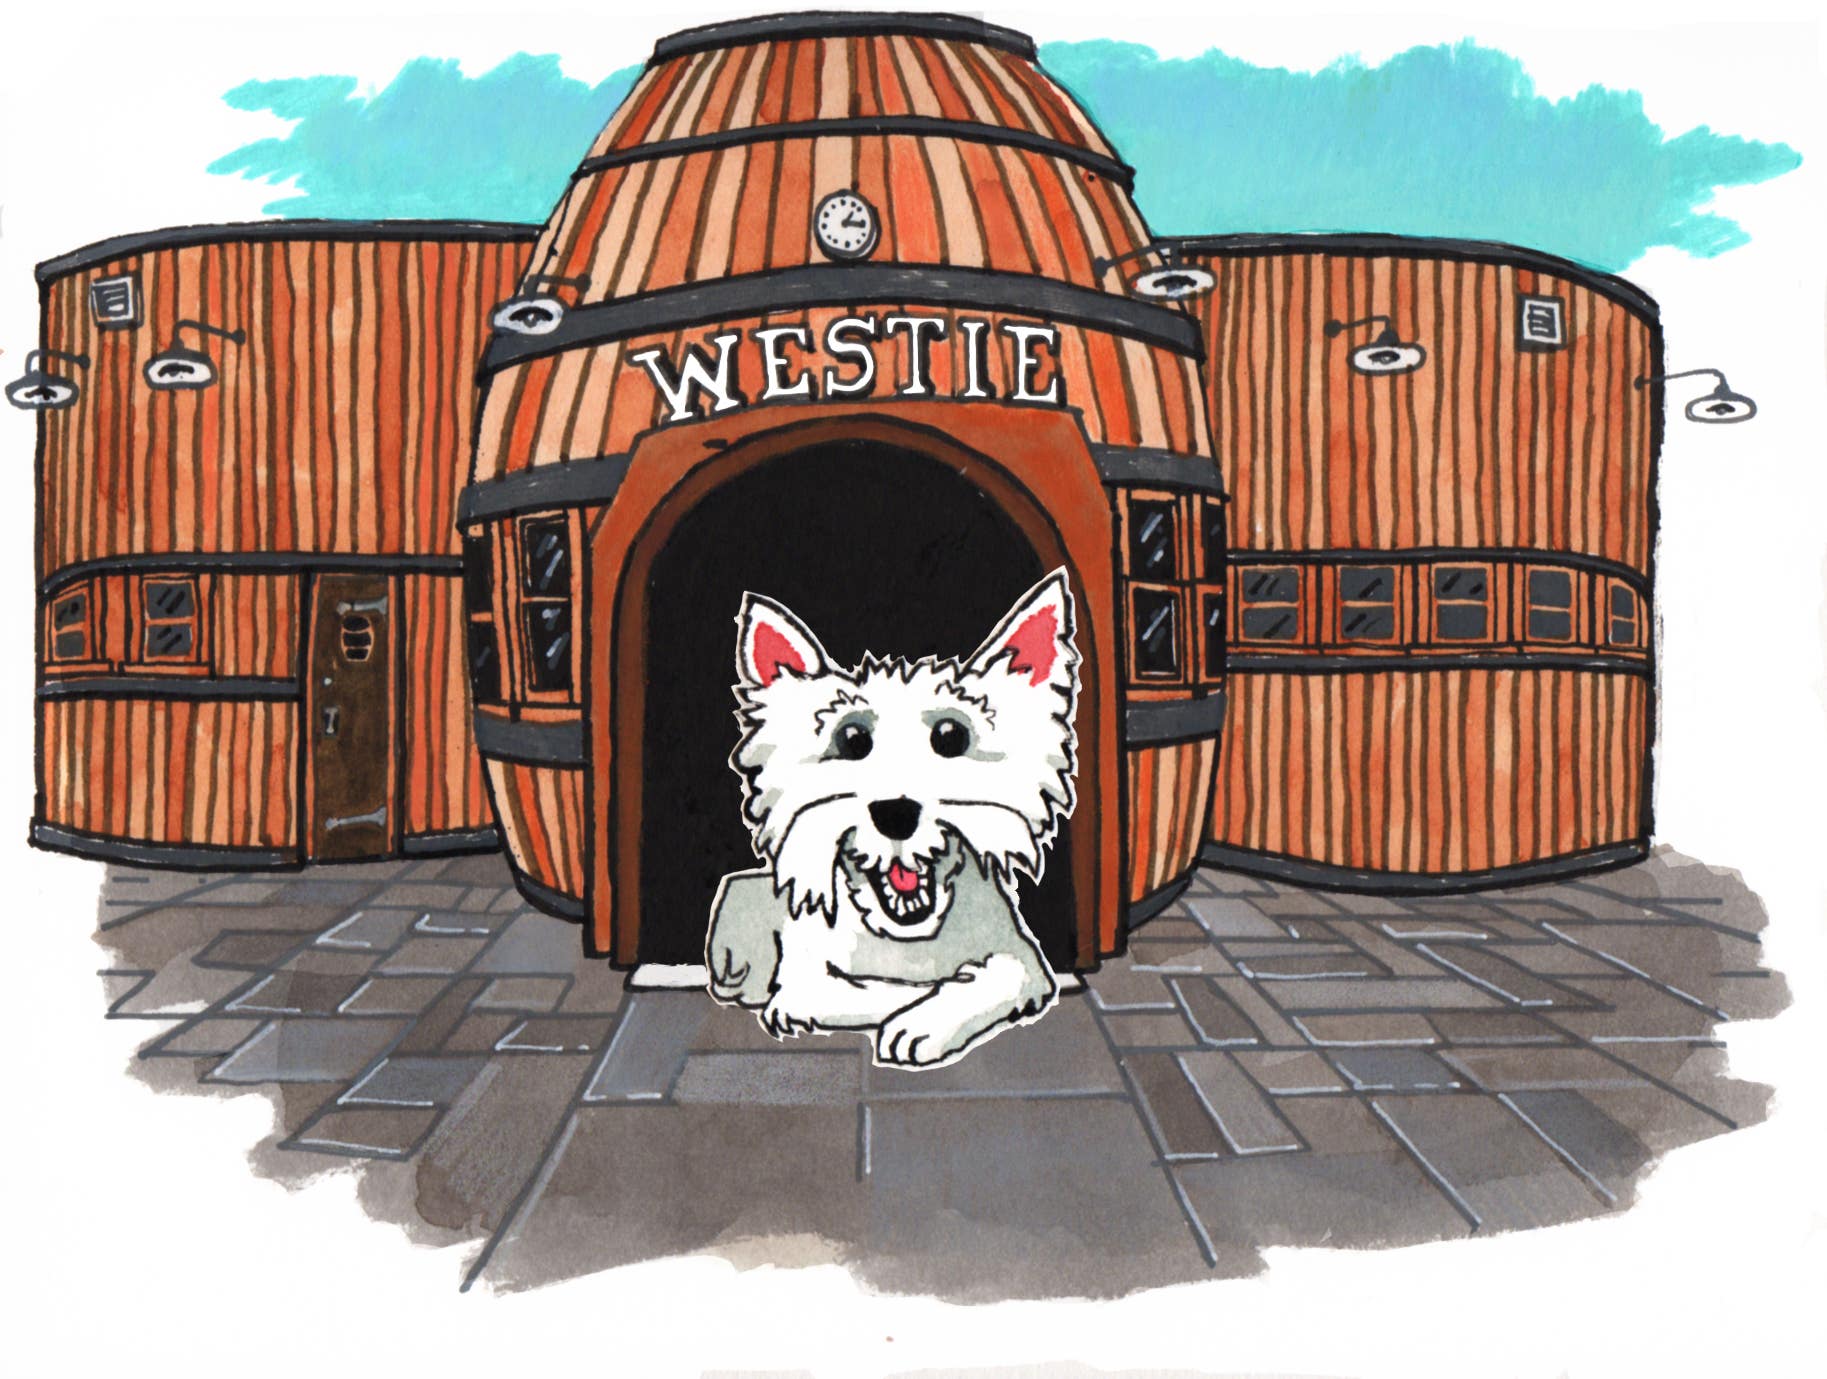 Westie at Idle Hour in North Hollywood | Illustration by Max Kornell